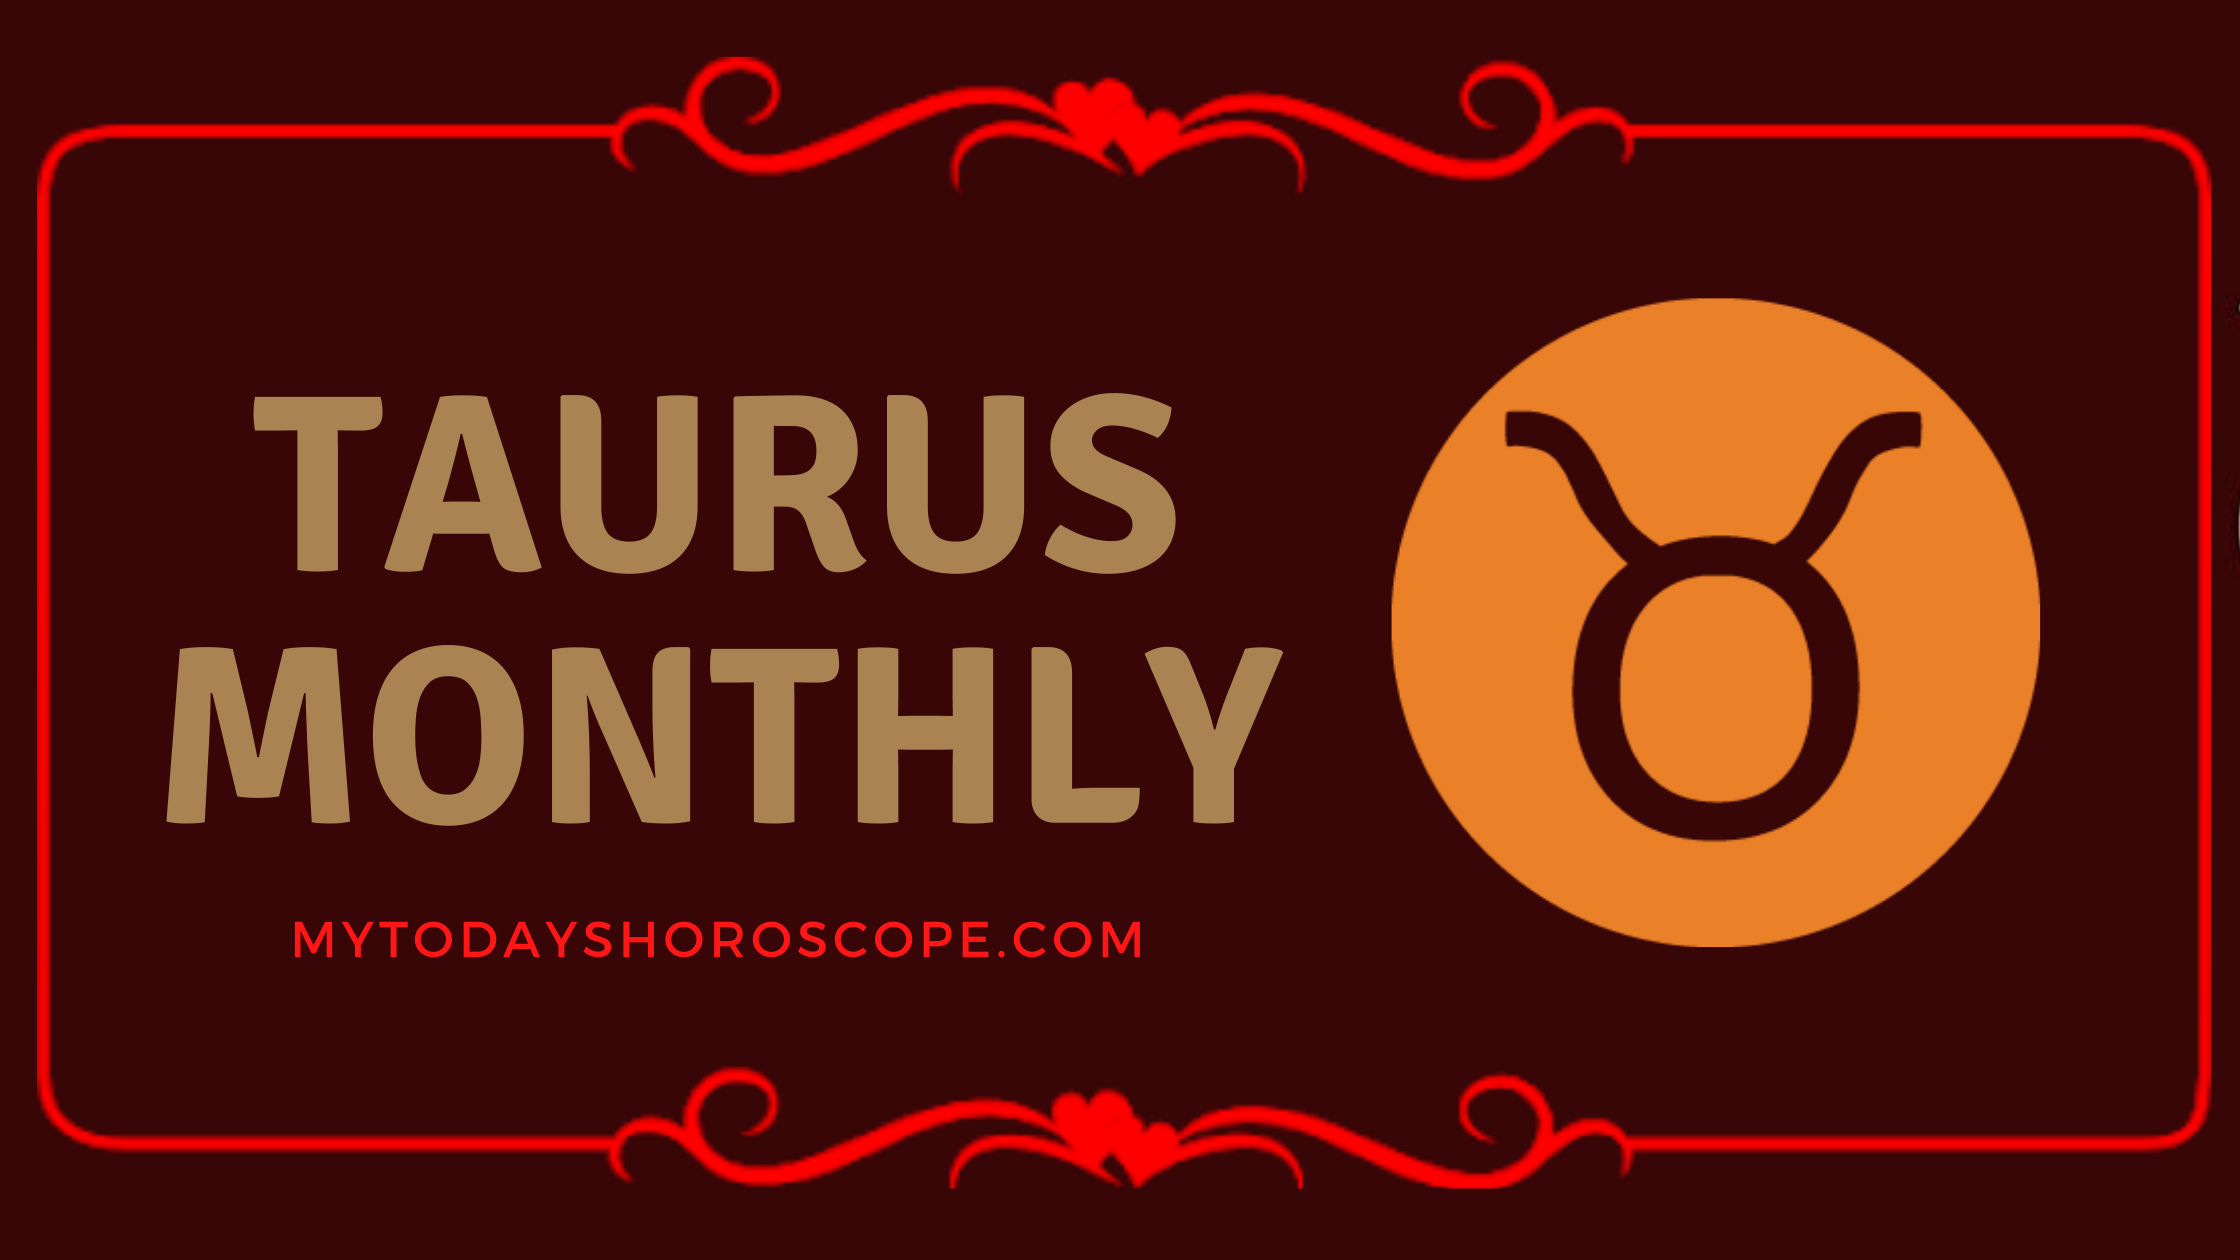 Taurus Monthly Love, Work and Well Being Horoscope